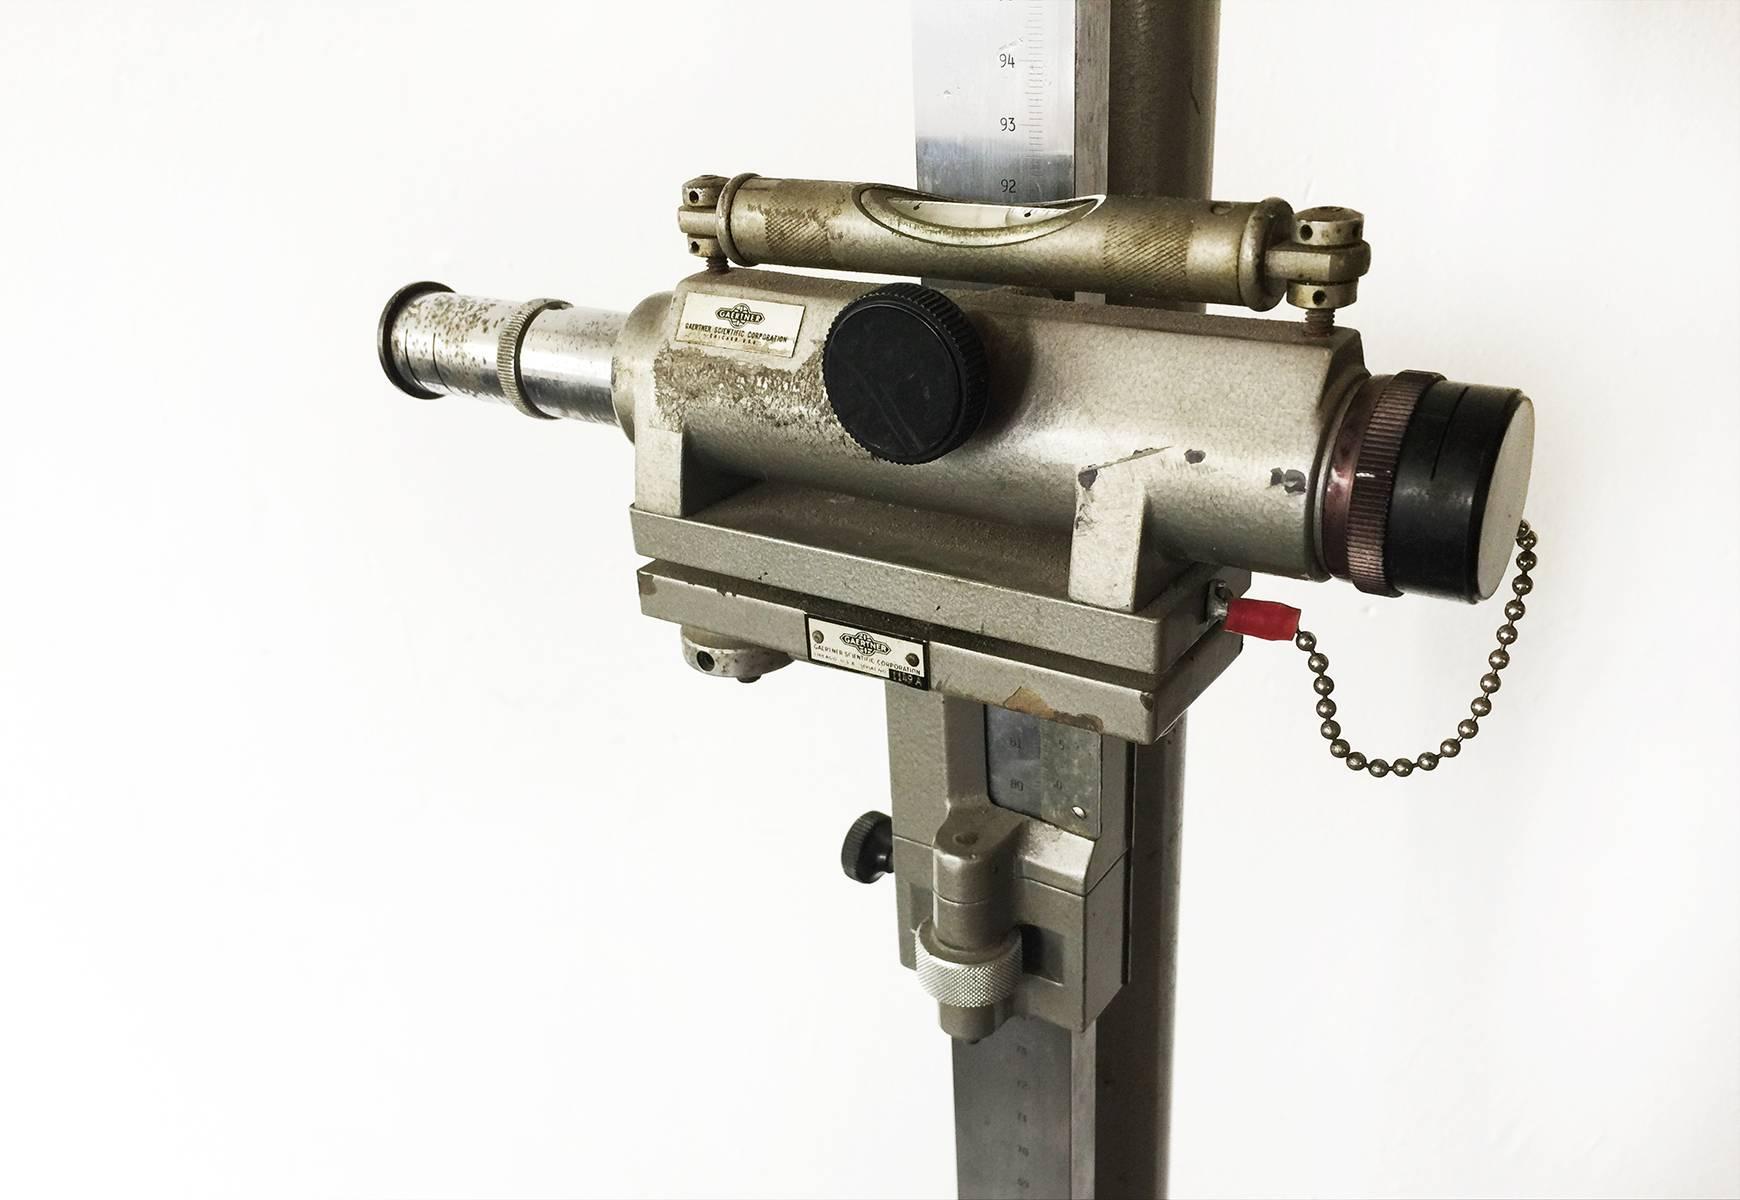 Vintage Gaertner scientific cathetometer once used in the UCLA science labs. This unique instrument, a vertical/ planning traveling telescope, allows for the measuring of vertical distances in cases where a scale cannot be placed very close to the